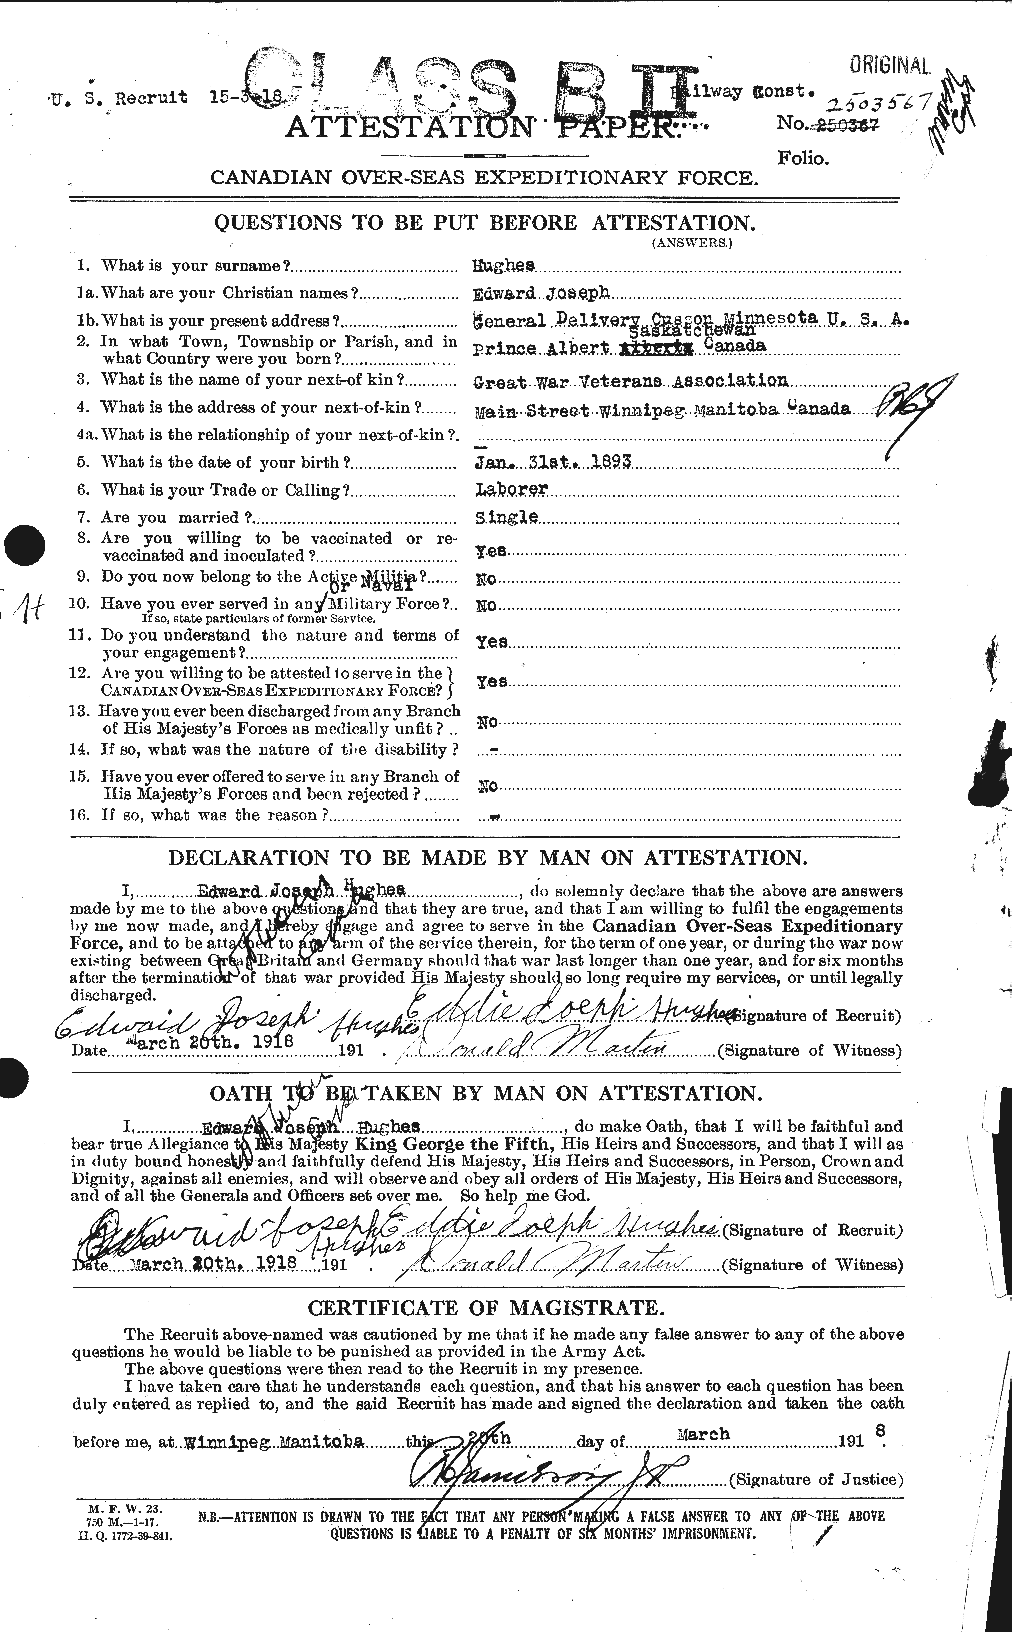 Personnel Records of the First World War - CEF 402686a